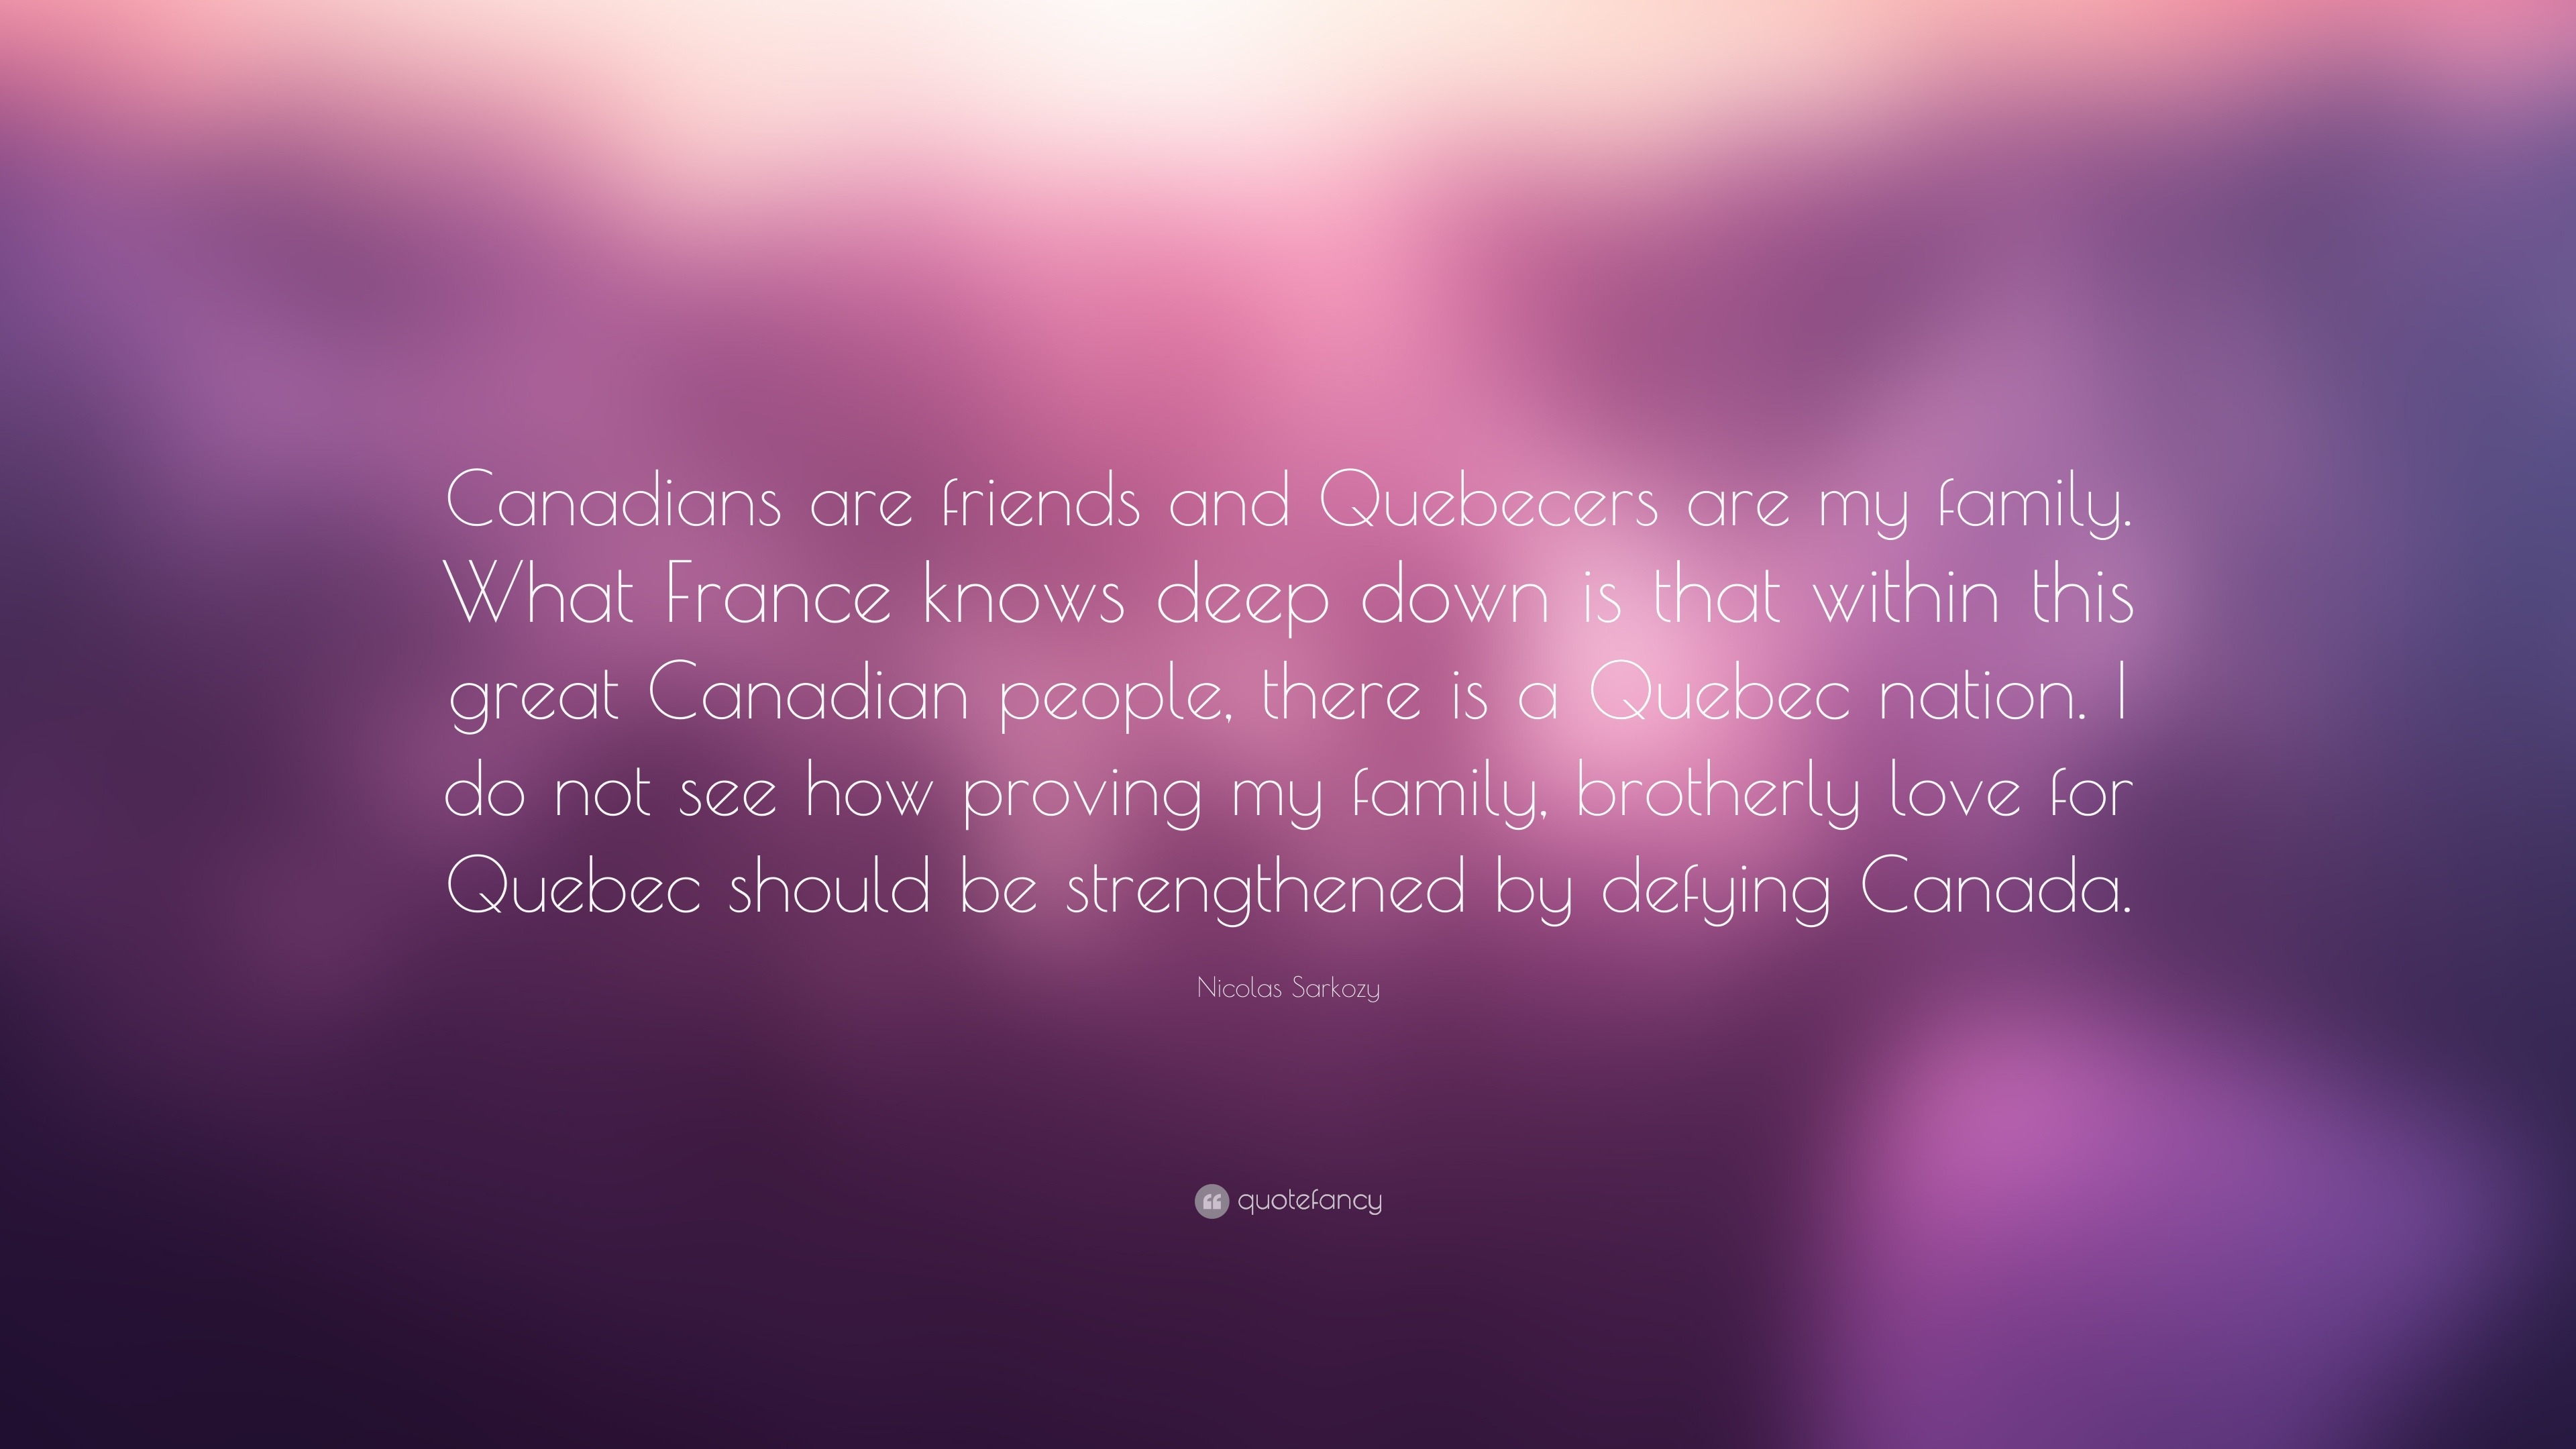 Nicolas Sarkozy Quote “Canadians are friends and Quebecers are my family What France